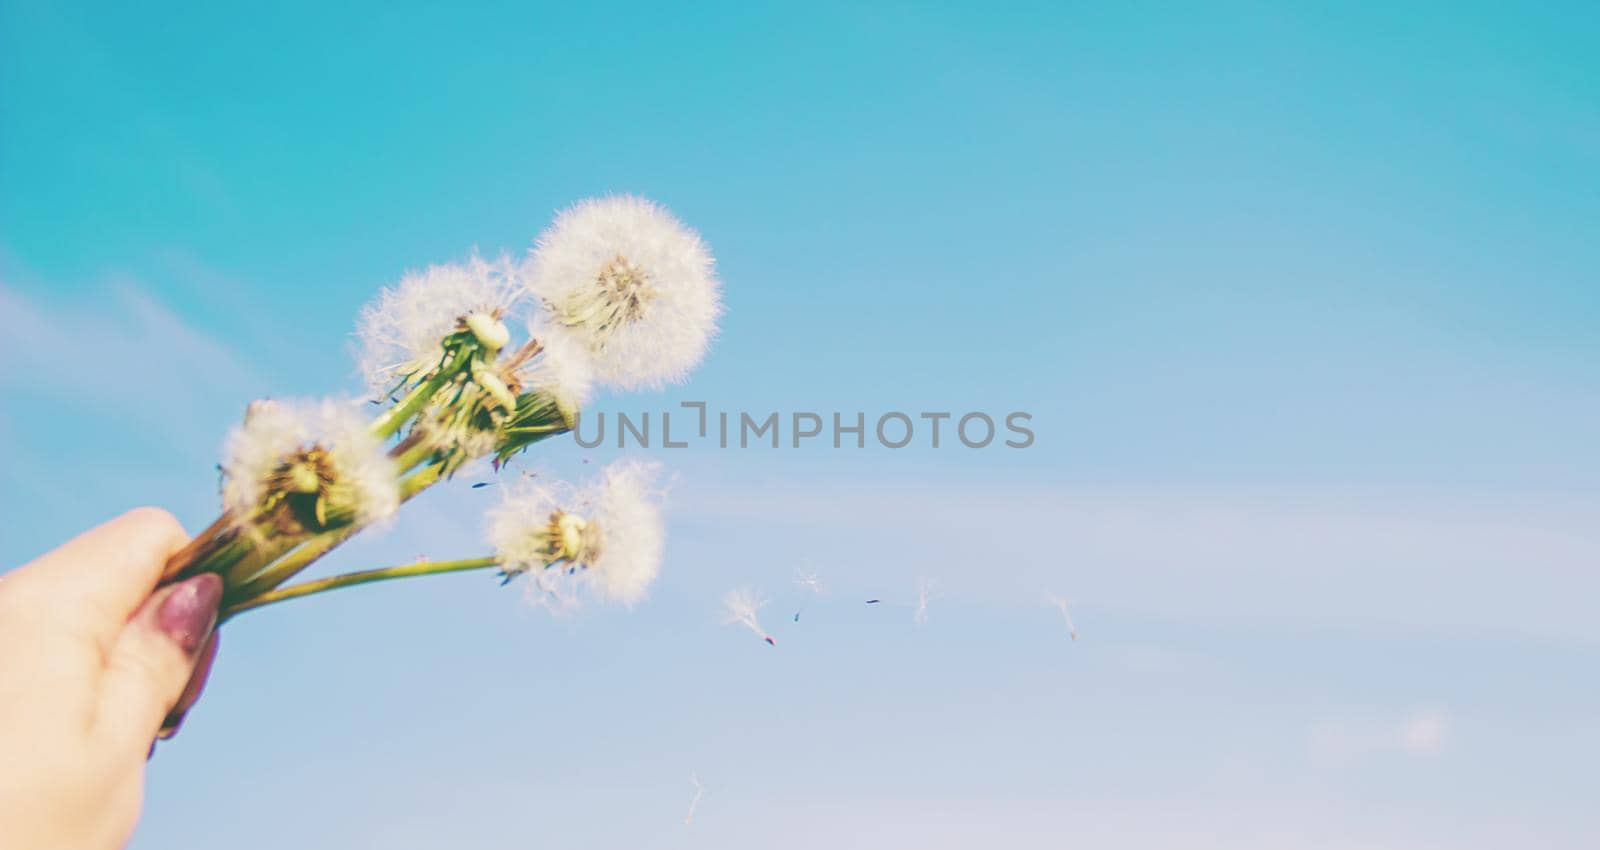 dandelions against the sky. Selective focus. Nature.